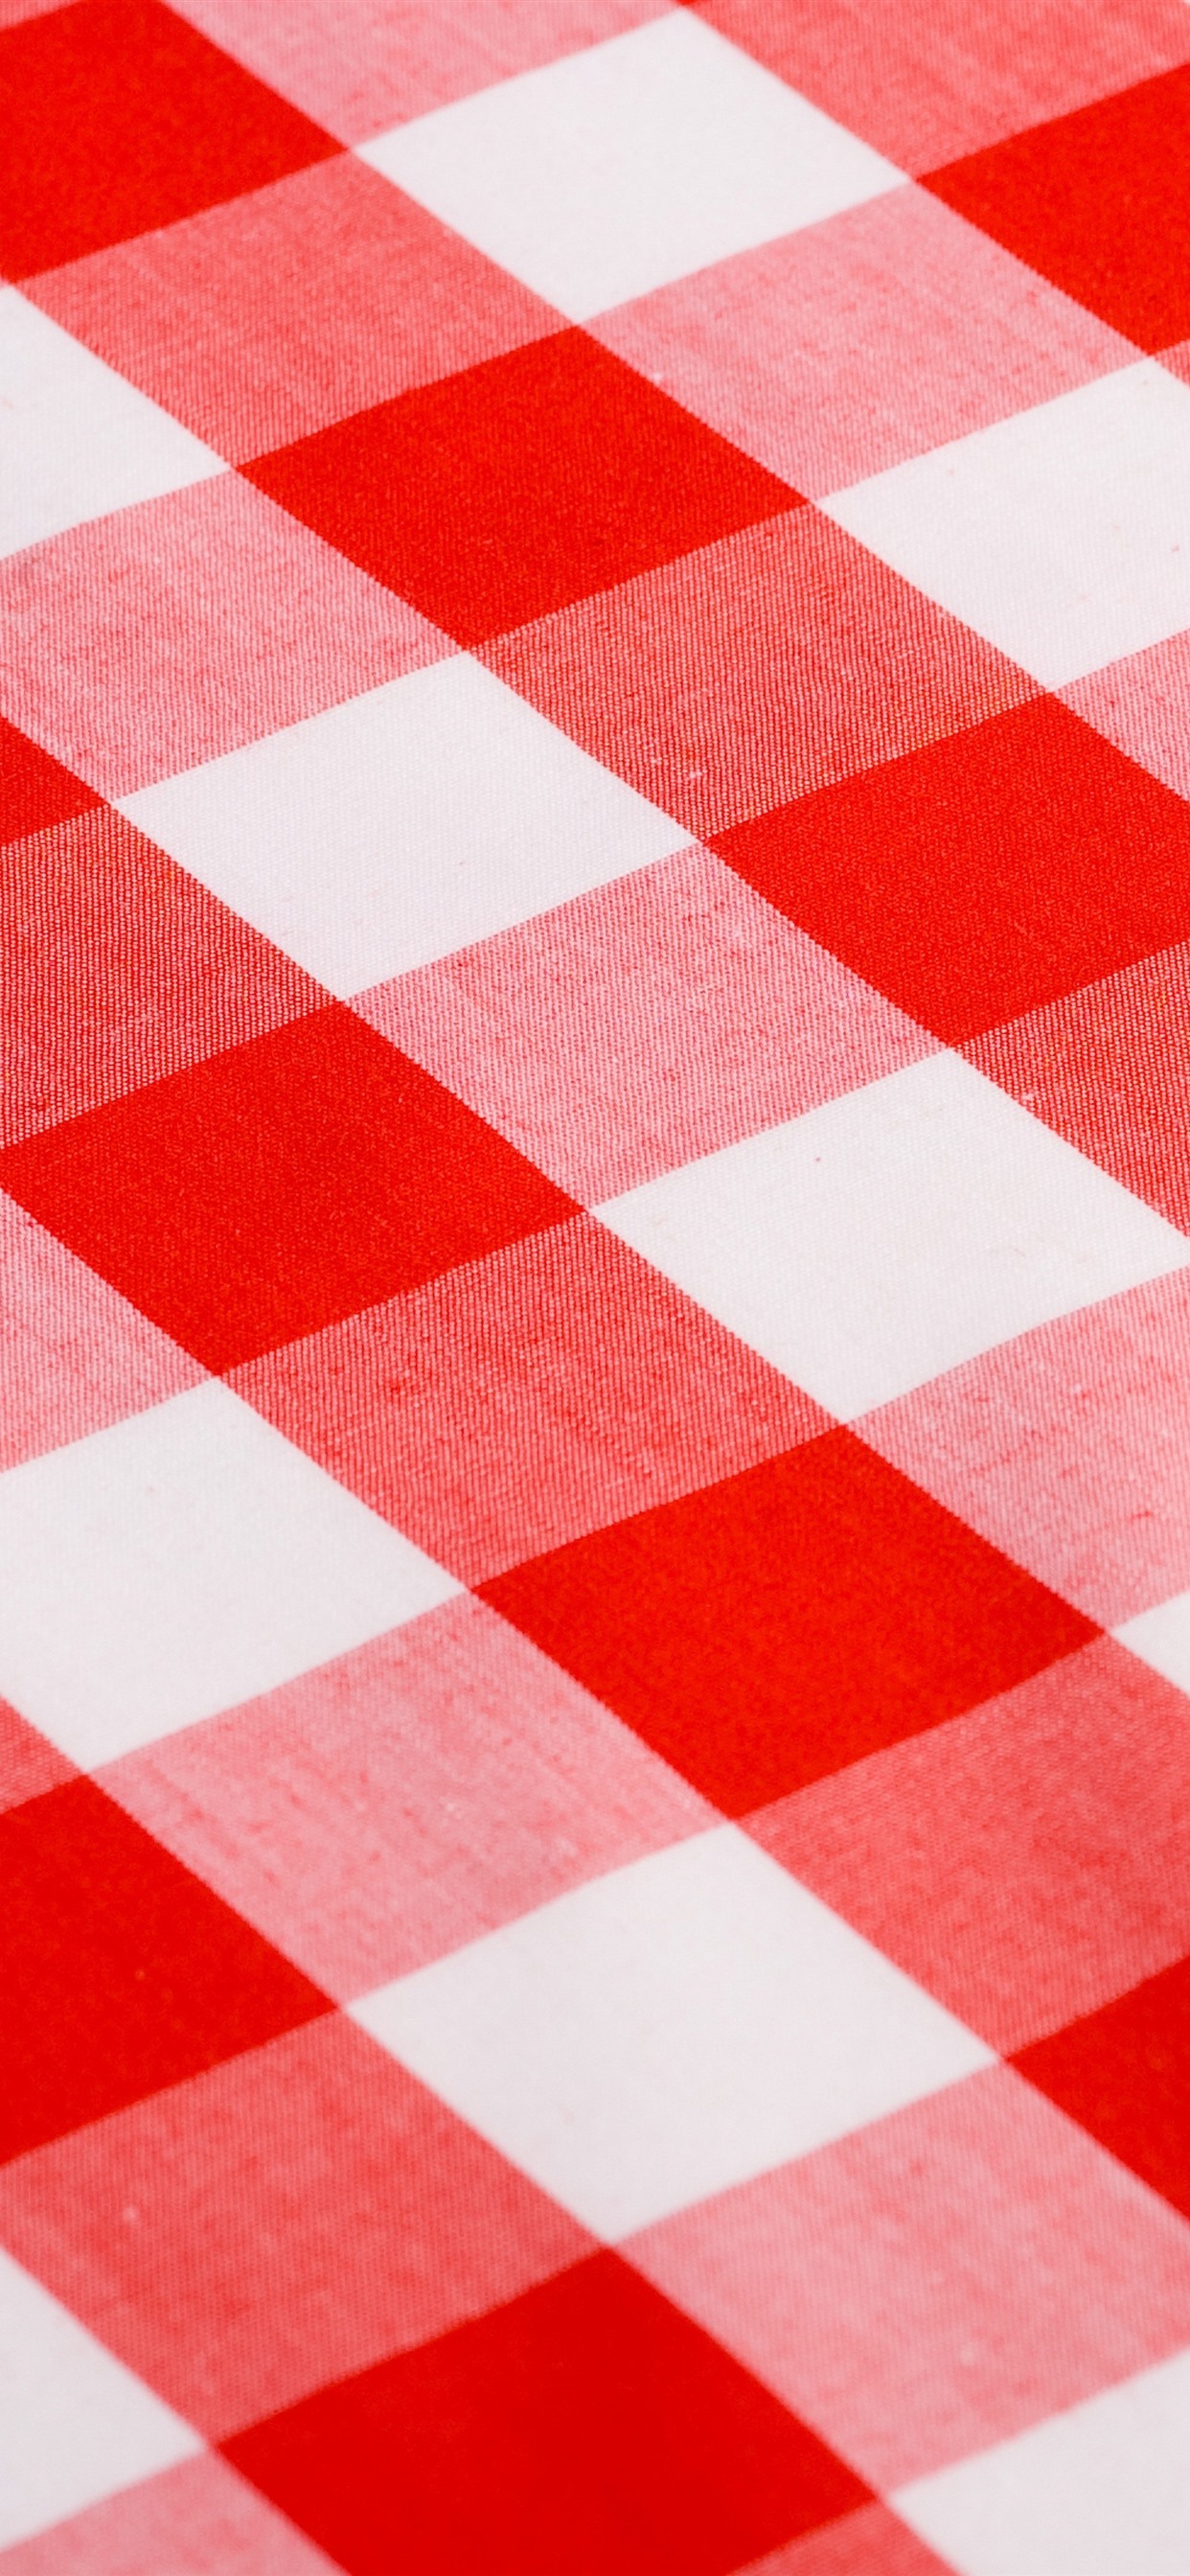 Red And White Tablecloth - HD Wallpaper 